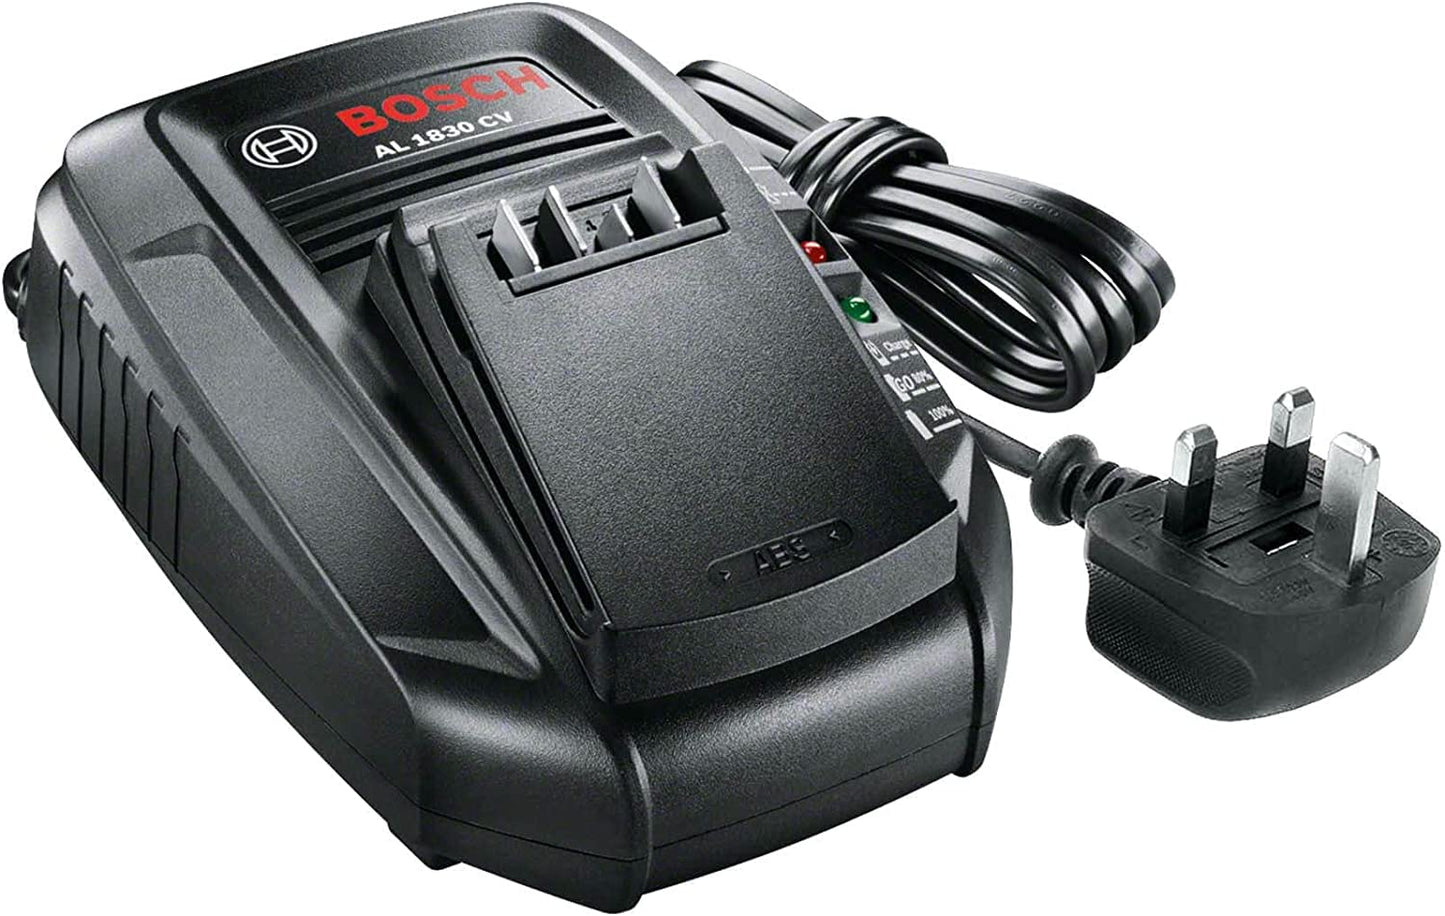 Home and Garden Charger AL 1830 CV (18 Volt System, in Carton Packaging)